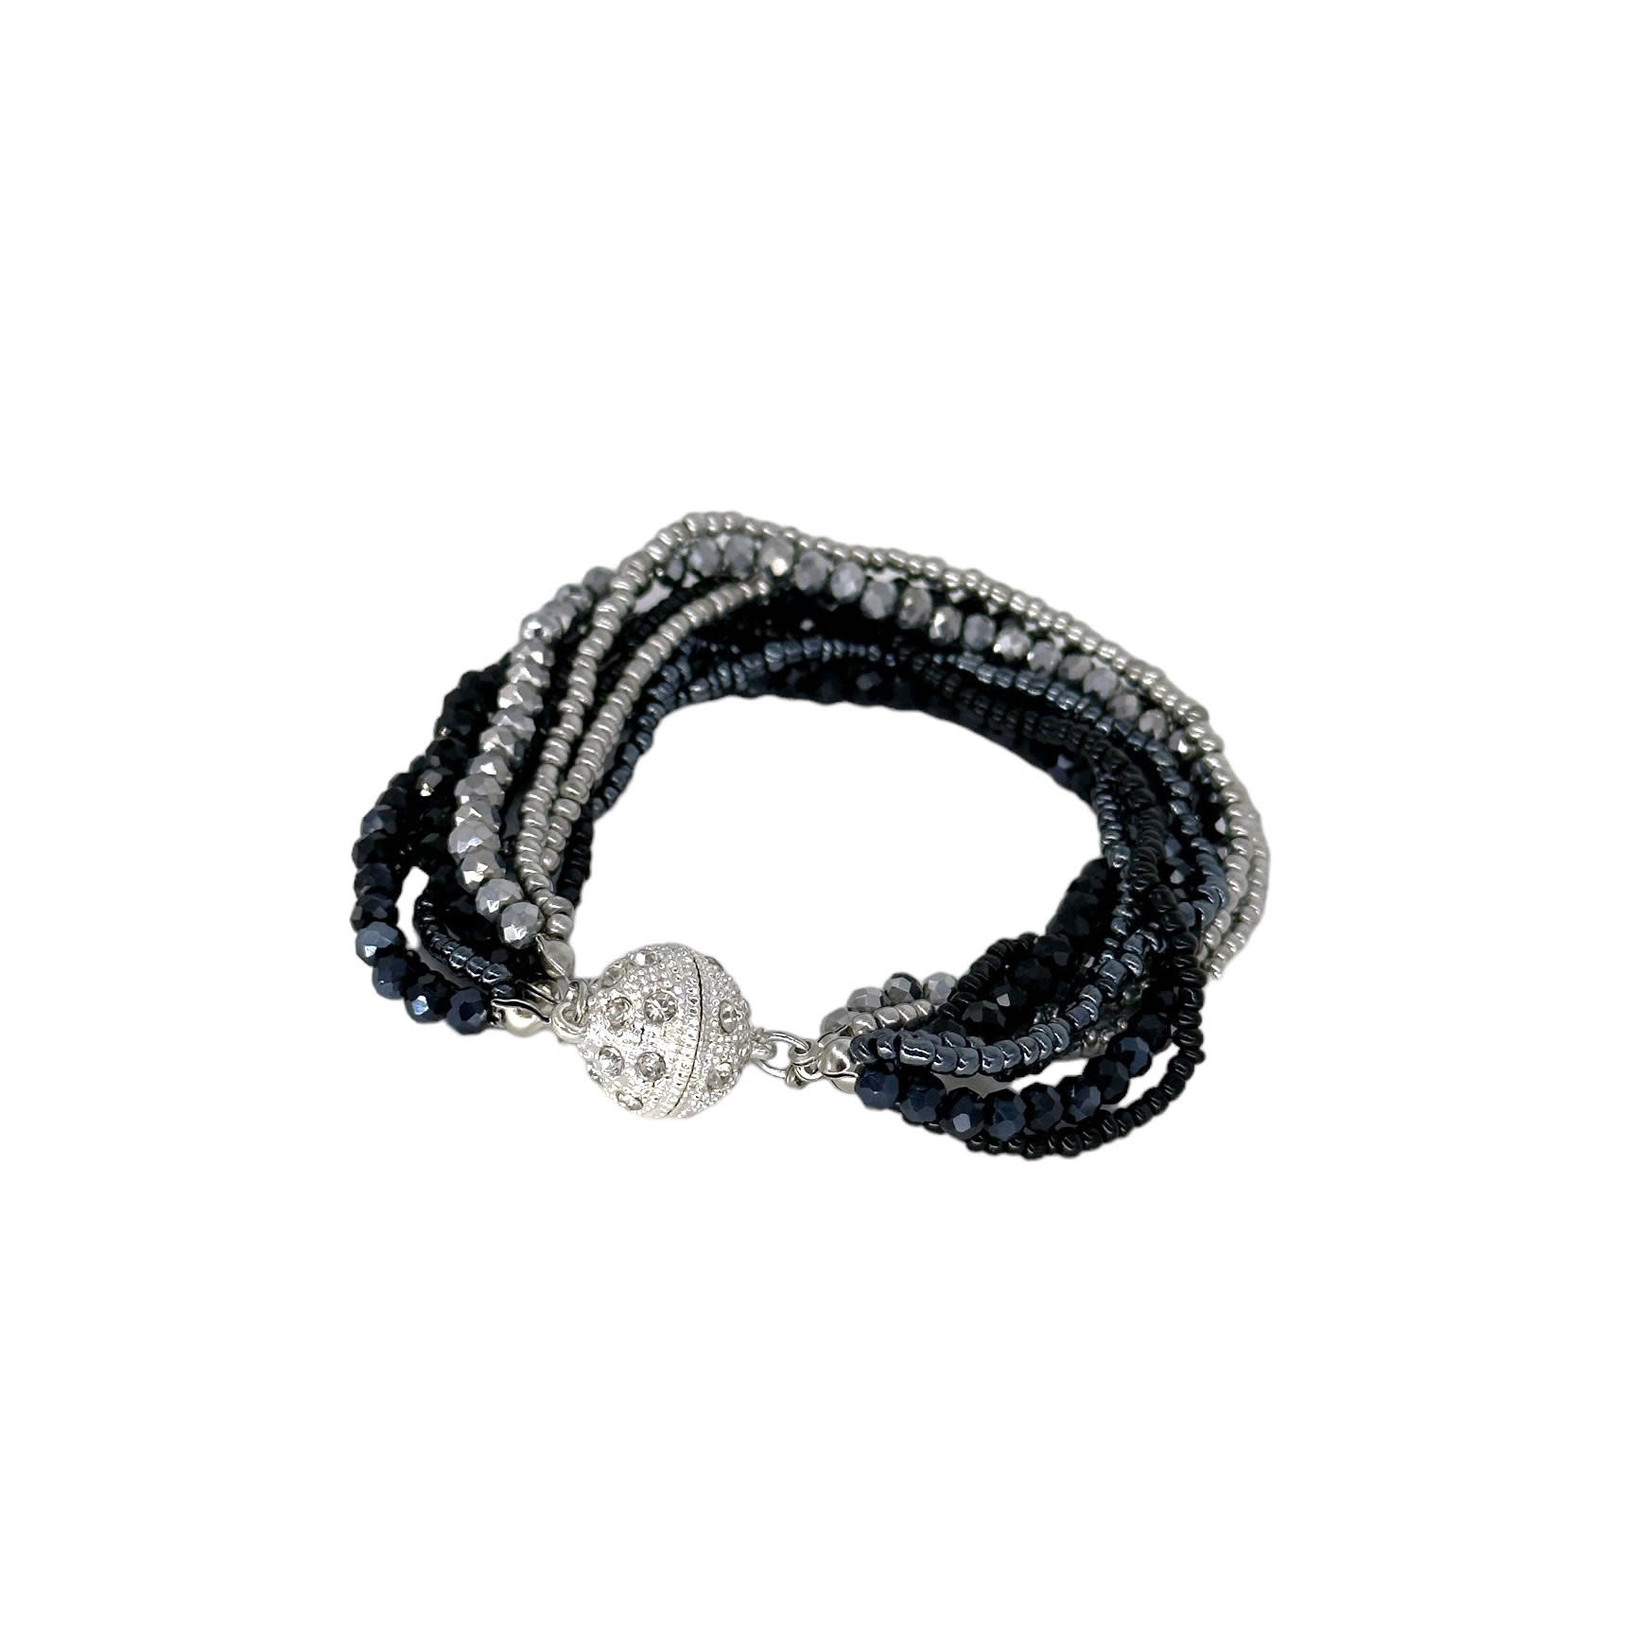 Glass and Faceted Bead Bracelet with Magnetic Ball Clasp Black & Silver